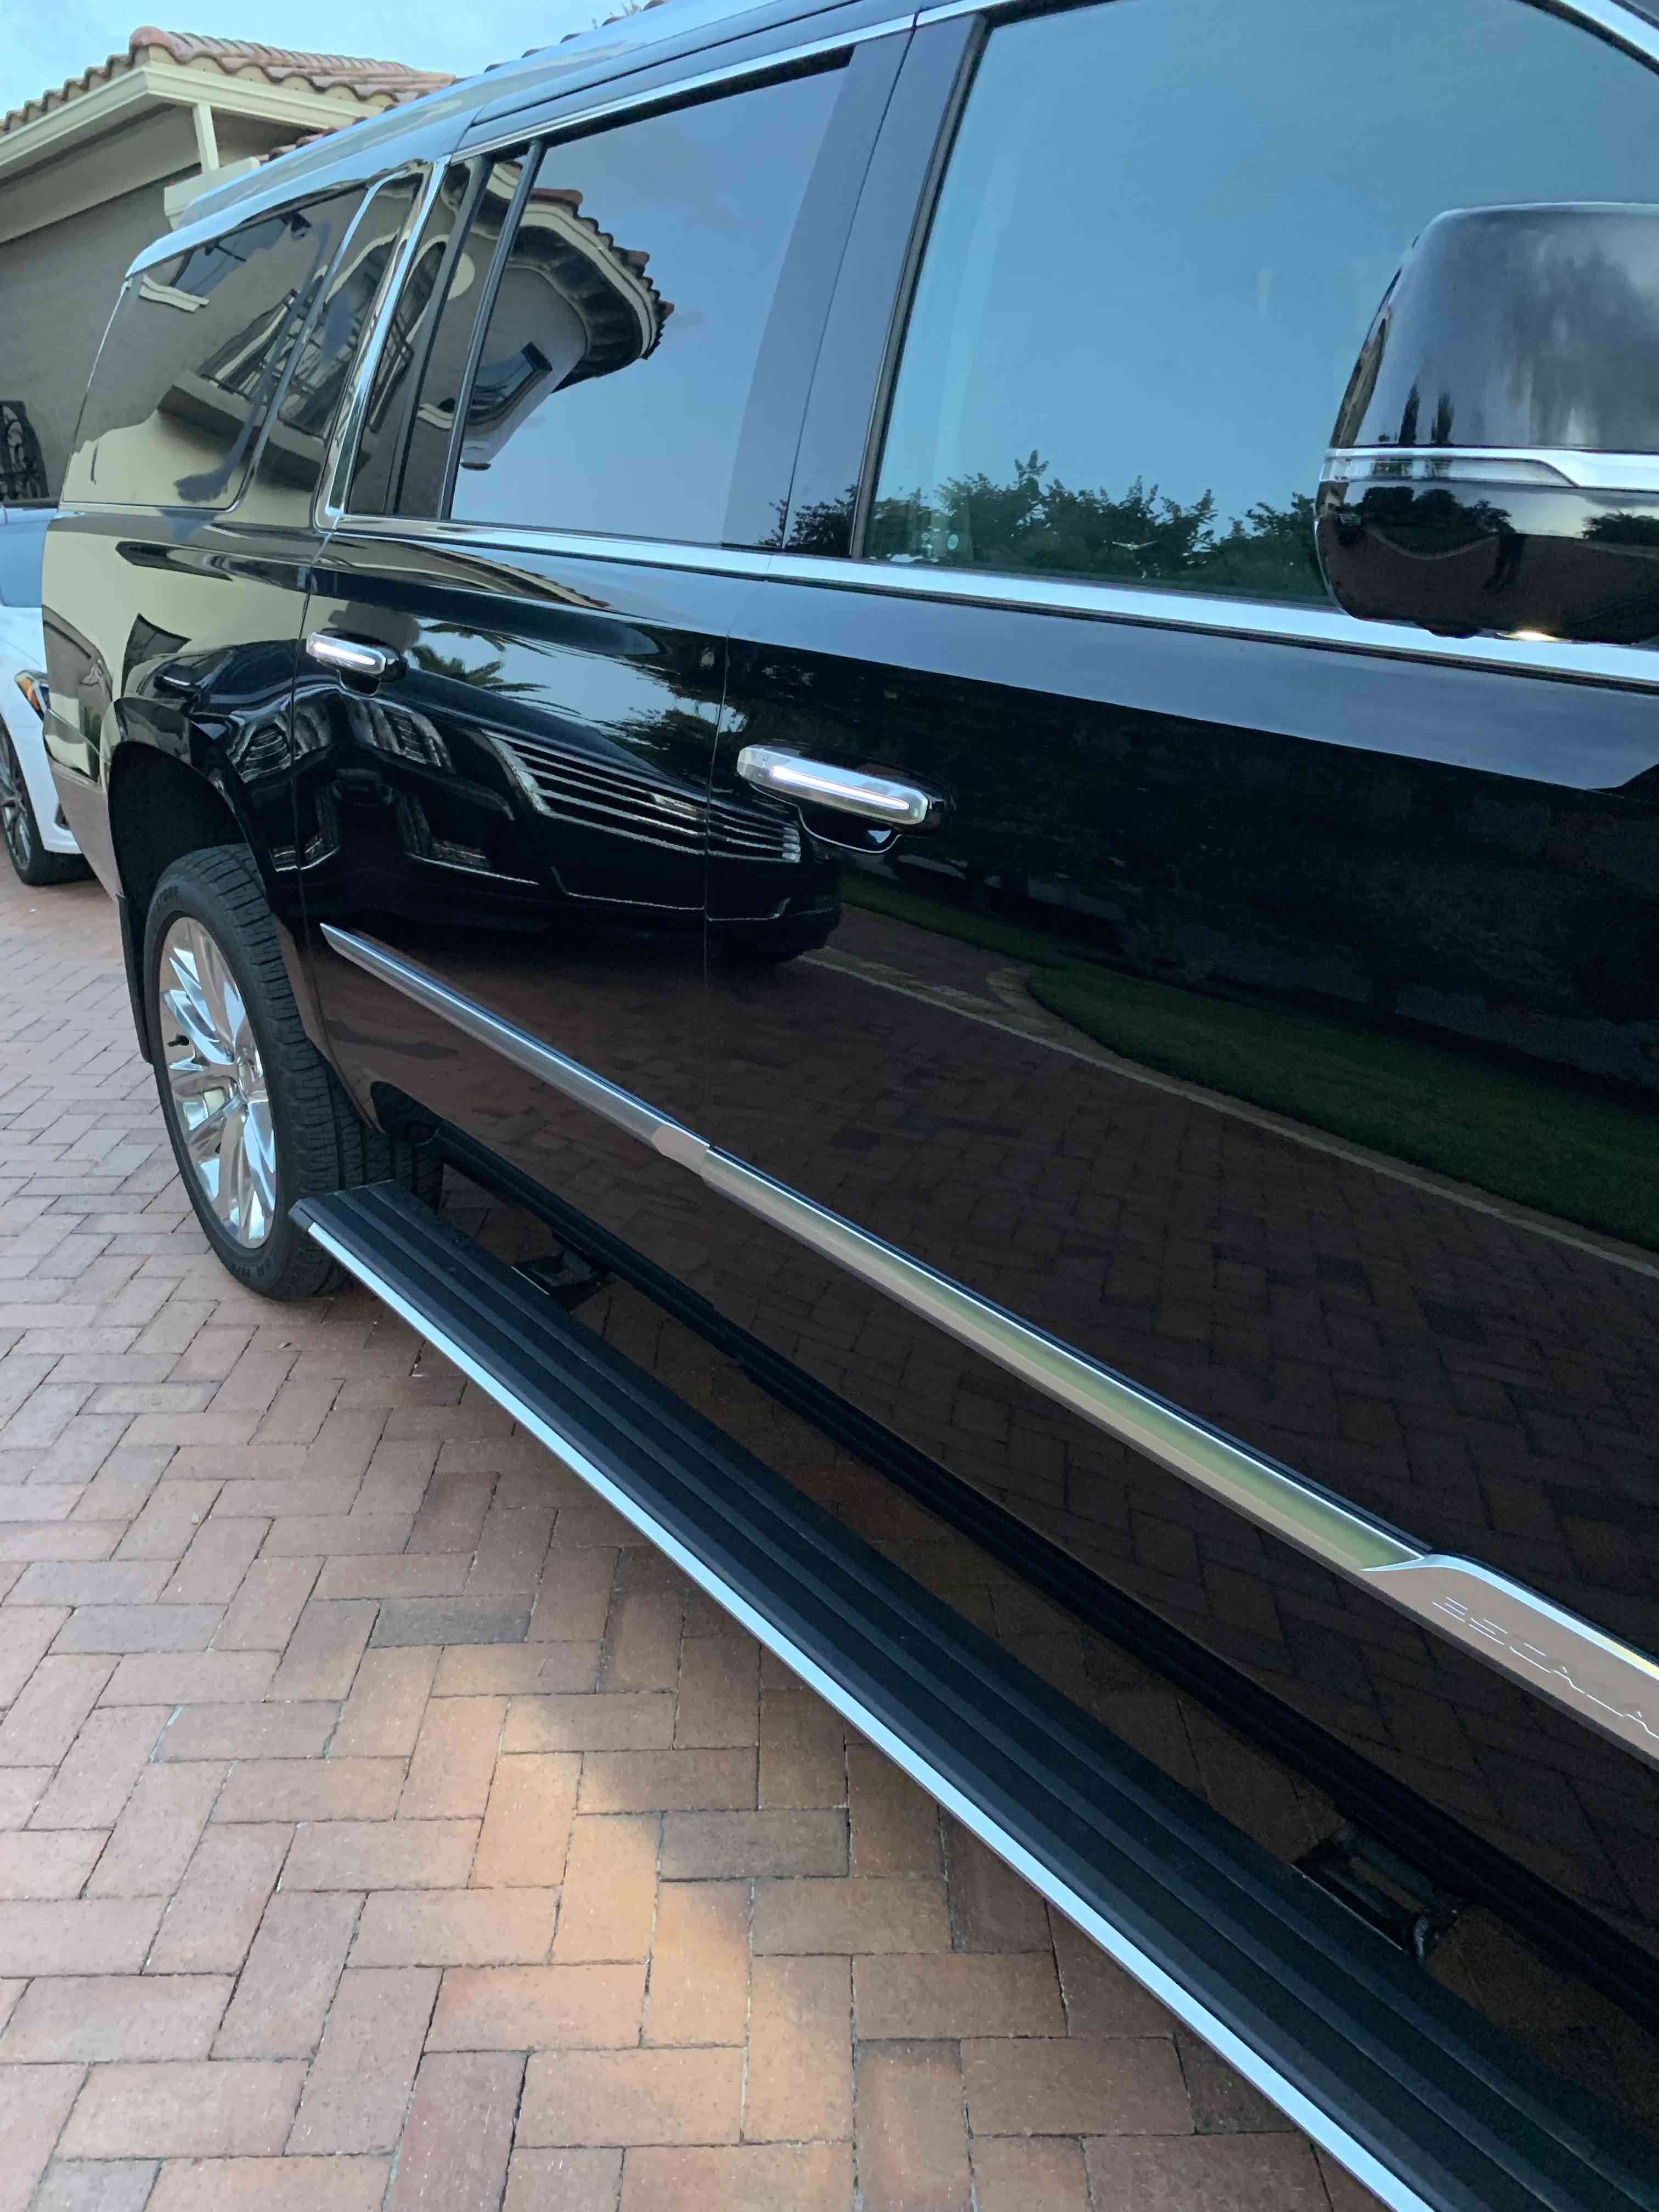 Mercedes Benz Limo: The king of the Stretch Limousines service, seats 7/15 Passengers in luxurious interior, Limo Miami provides elegant, dependable luxury transportation/from Boca To Miamii area airports.